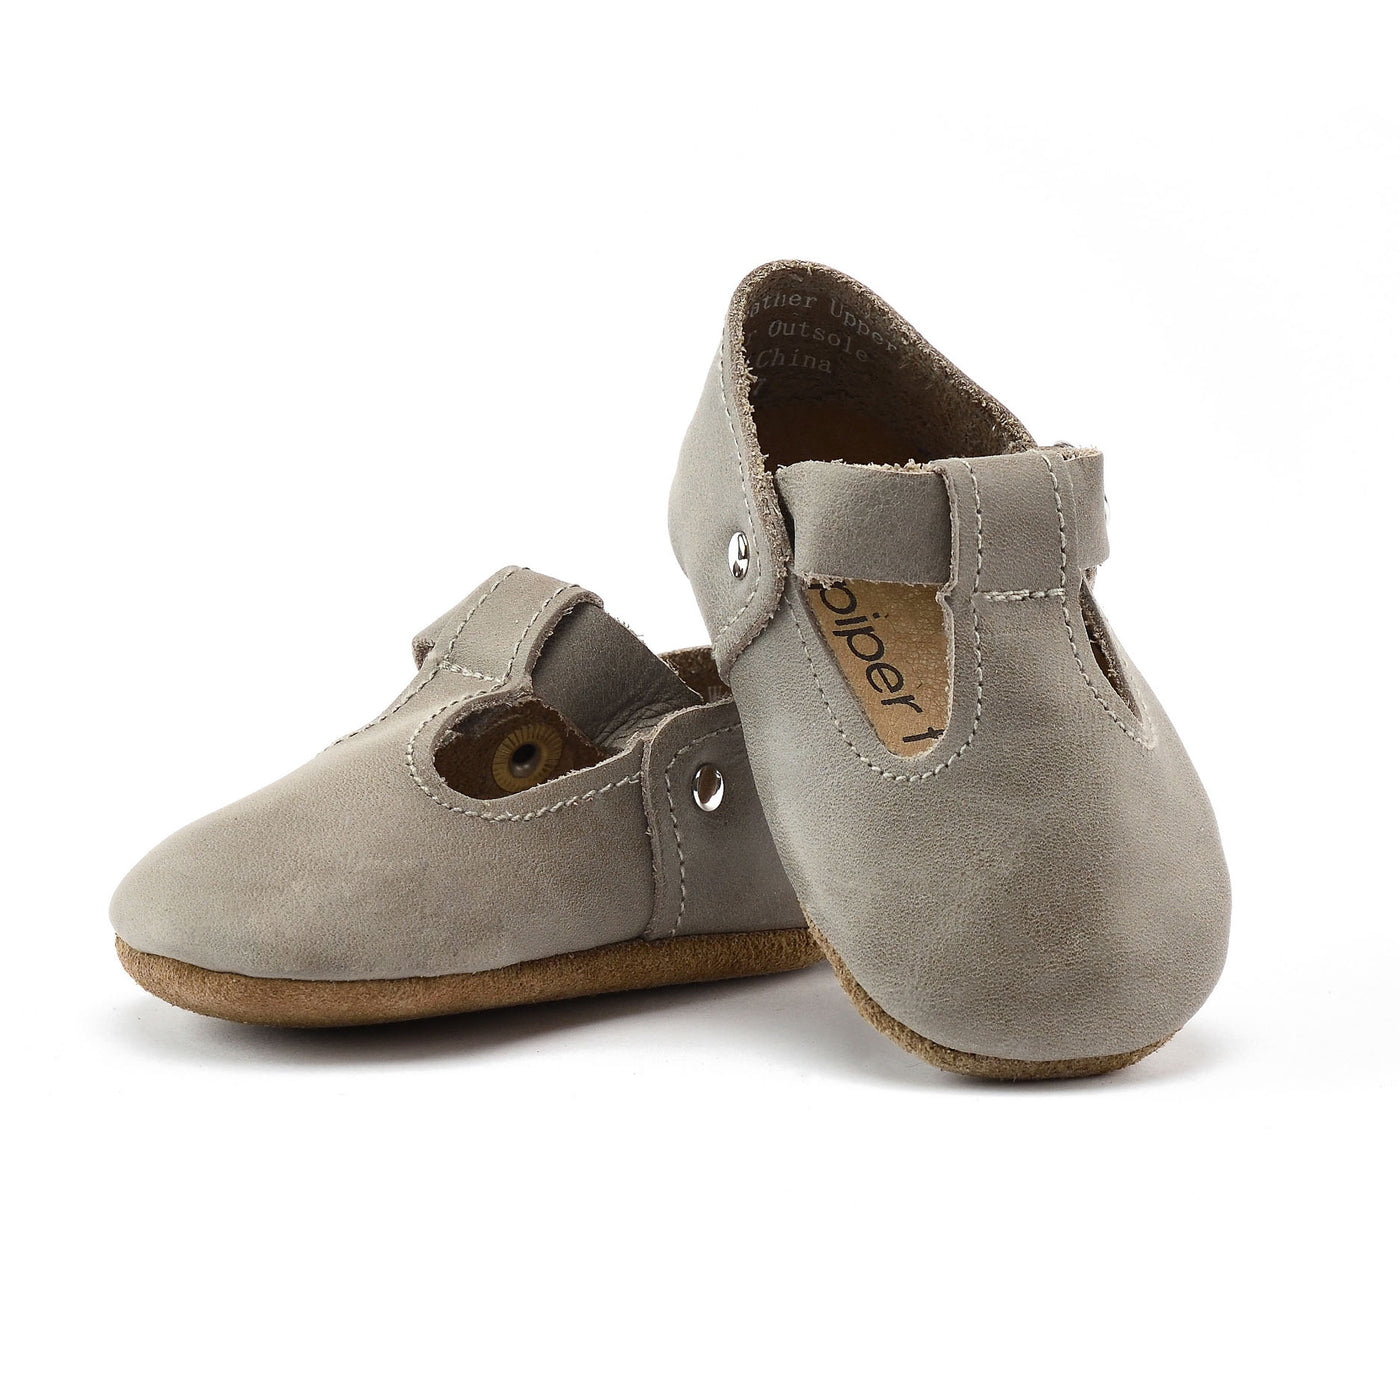 Piper Finn - Baby & Toddler Girl Shoes - T-Strap Mary Jane - Stone ...